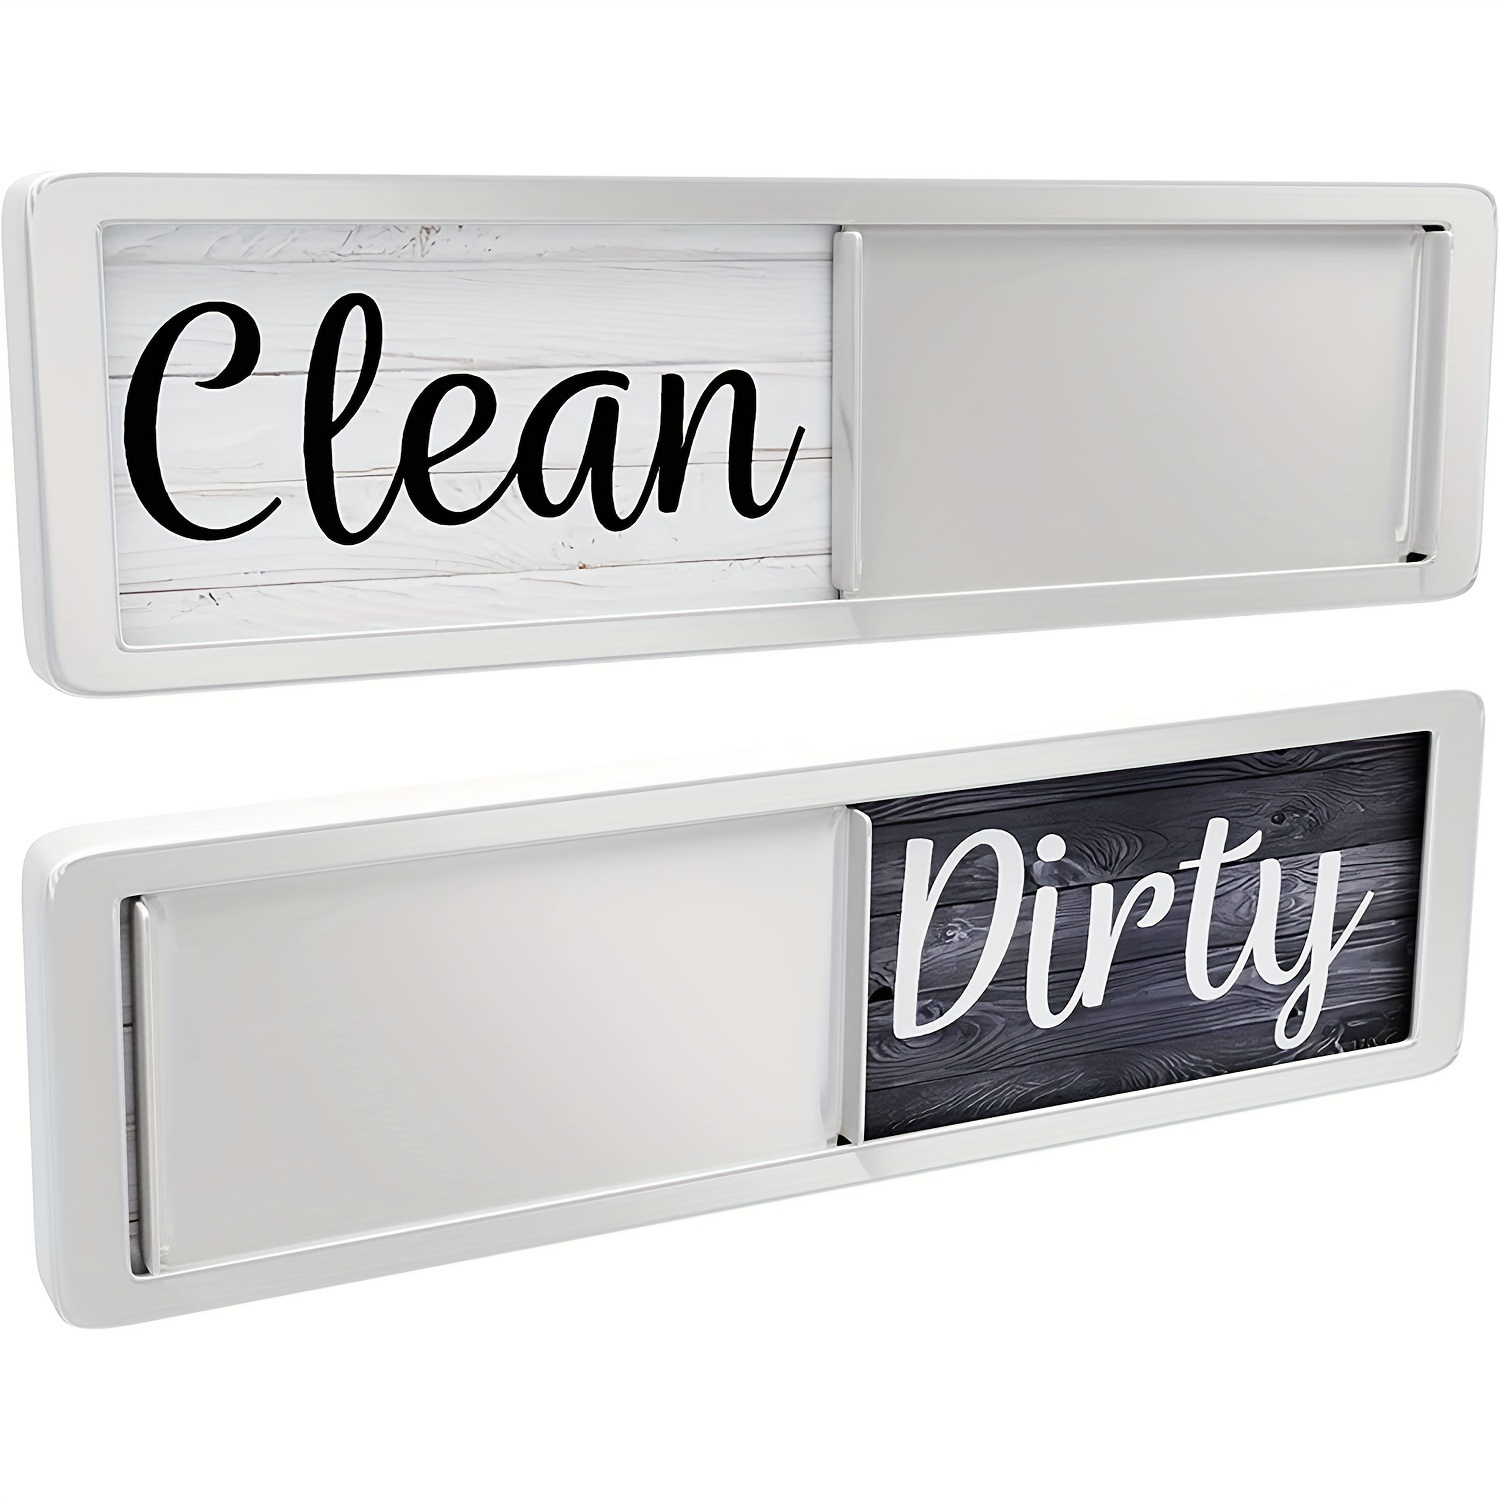 

1pc Dishwasher Magnet Clean Dirty Sign, Clean Dirty Magnet For Dishwasher Universal Dirty Clean Dishwasher Magnet Indicator For Kitchen Organization